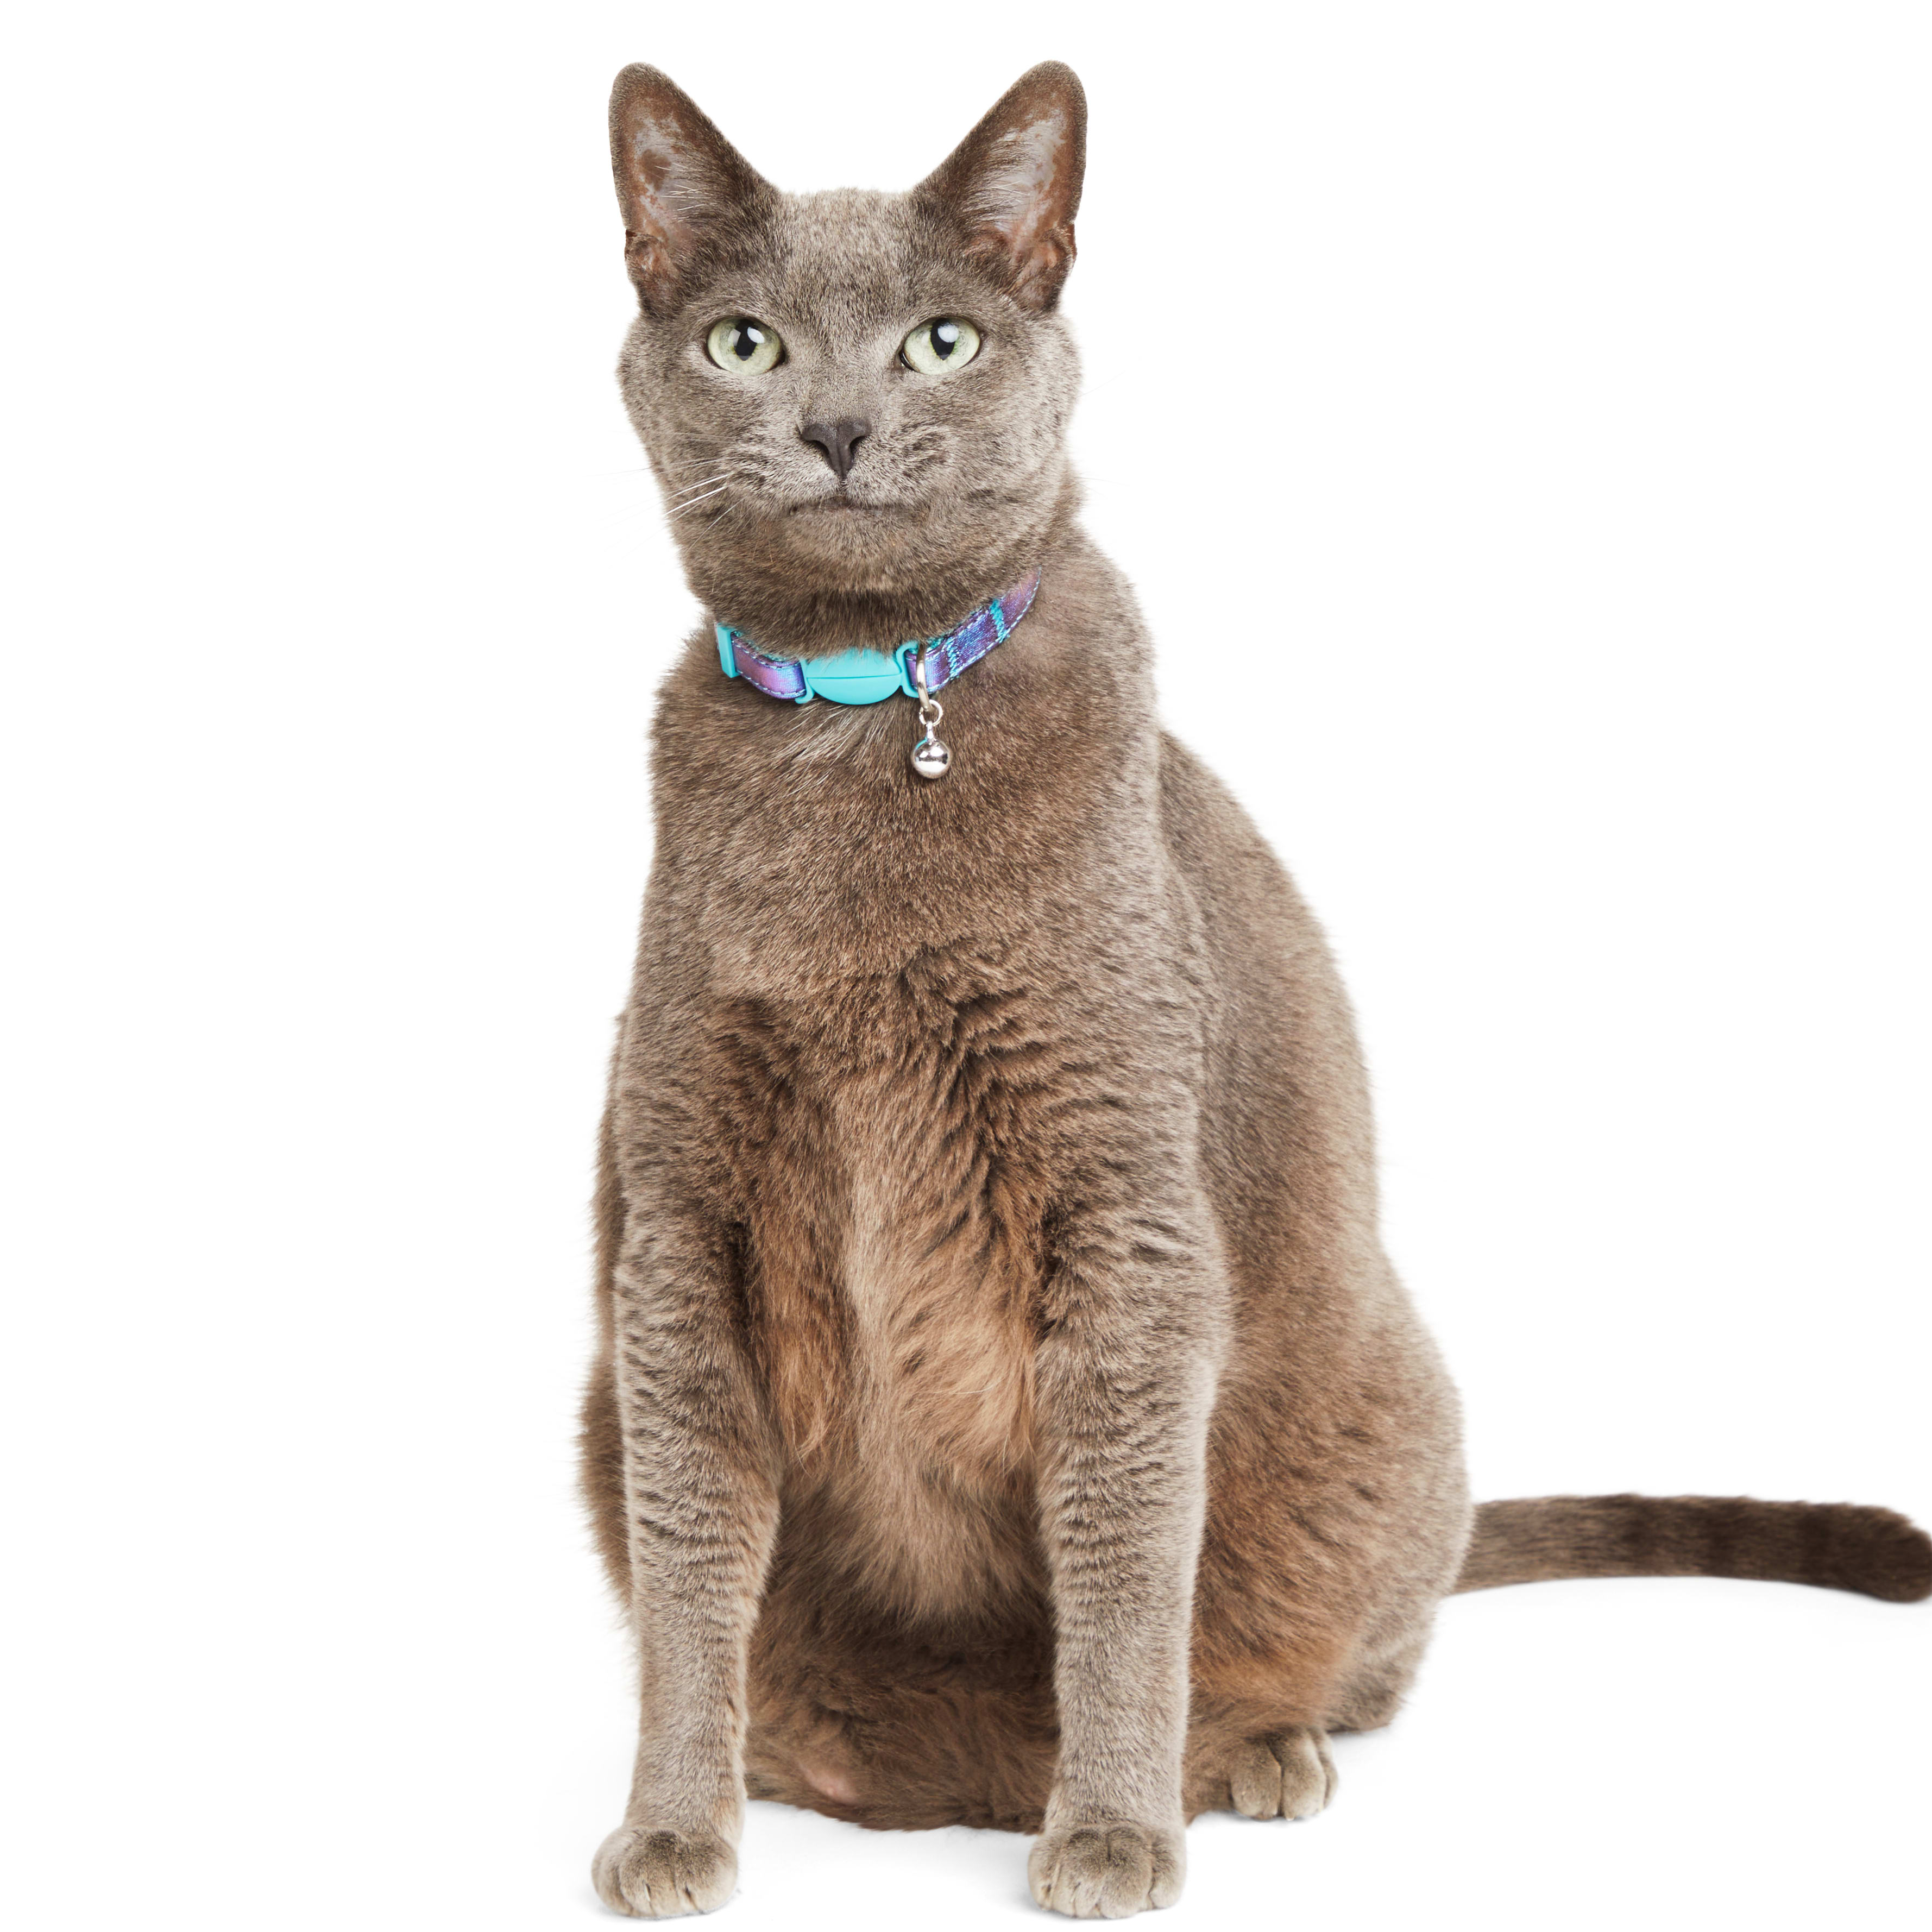 YOULY Yellow Bee Cat Collar